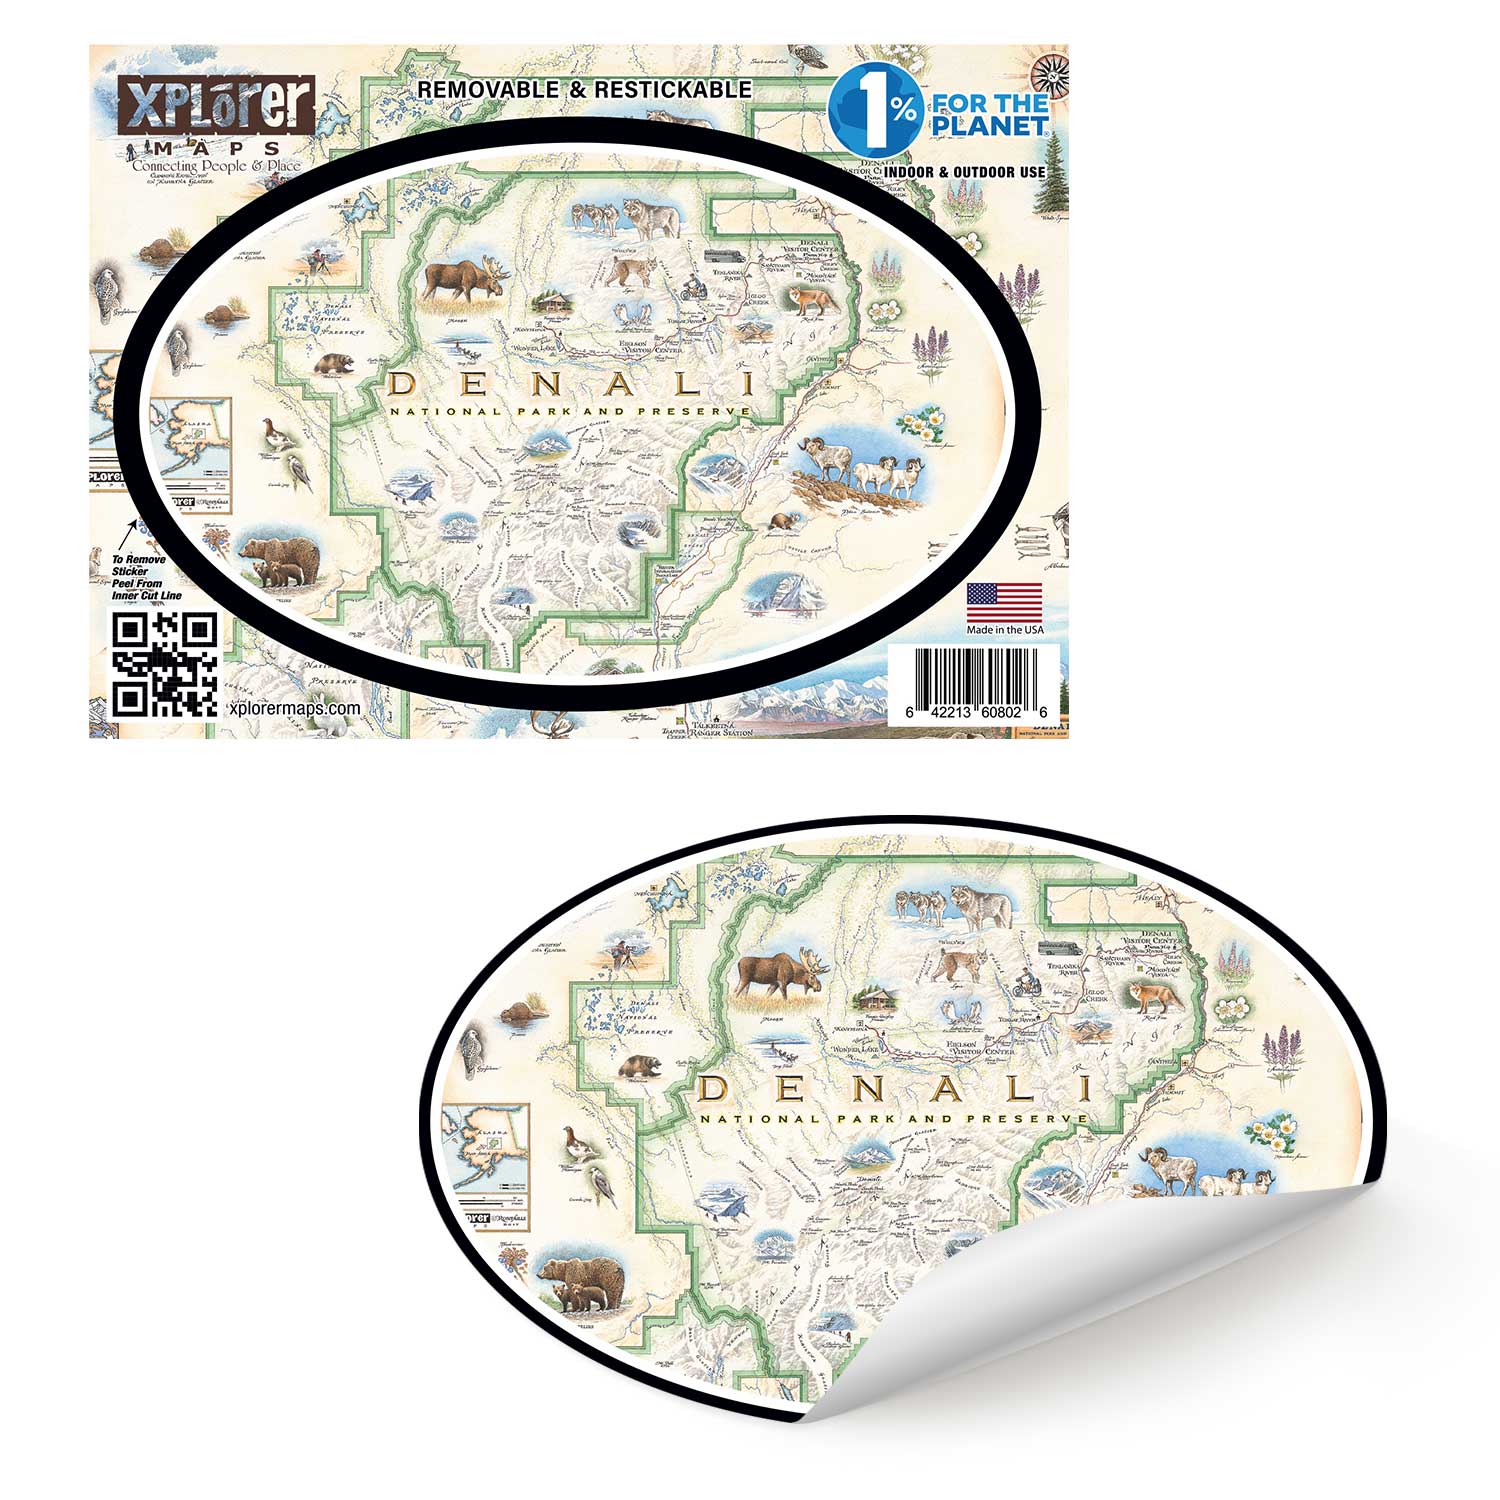  Denali National Park Map Sticker by Xplorer Maps. Featuring illustrations of the major flora and fauna found in the park, such as grizzly bears, wolverines, moose, lynx, Dall sheep, and many more. Major attractions are illustrated on the map, like the Talkeetna Visitor Center, Denali Visitor Center, Ruth Glacier, and Kahiltna Glacier.